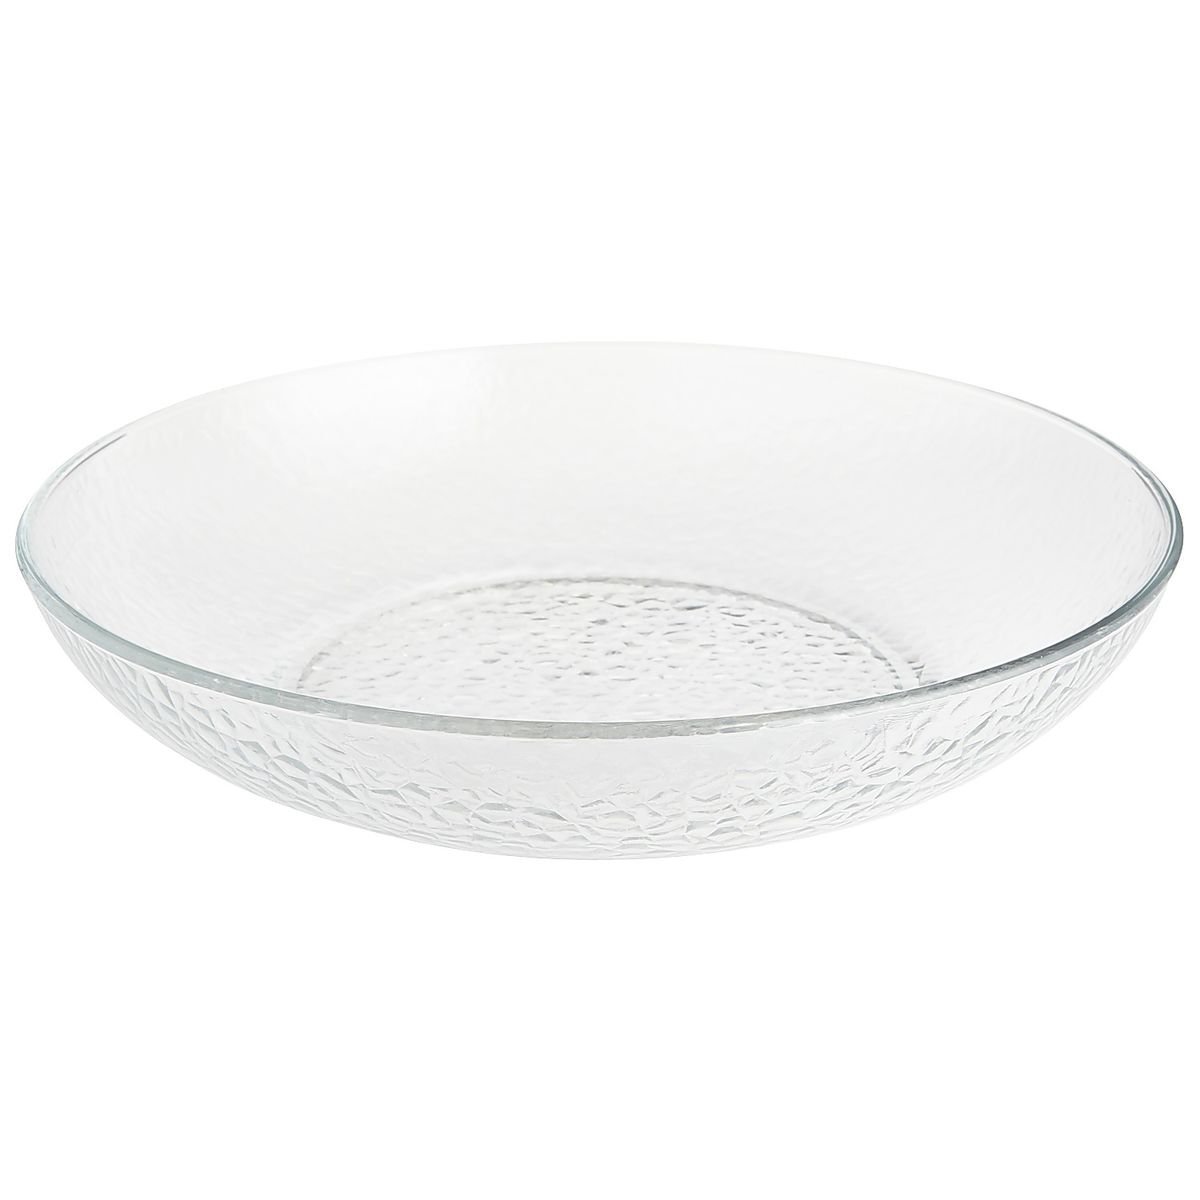 Bowl Frosted Glass Pier 1 Imports